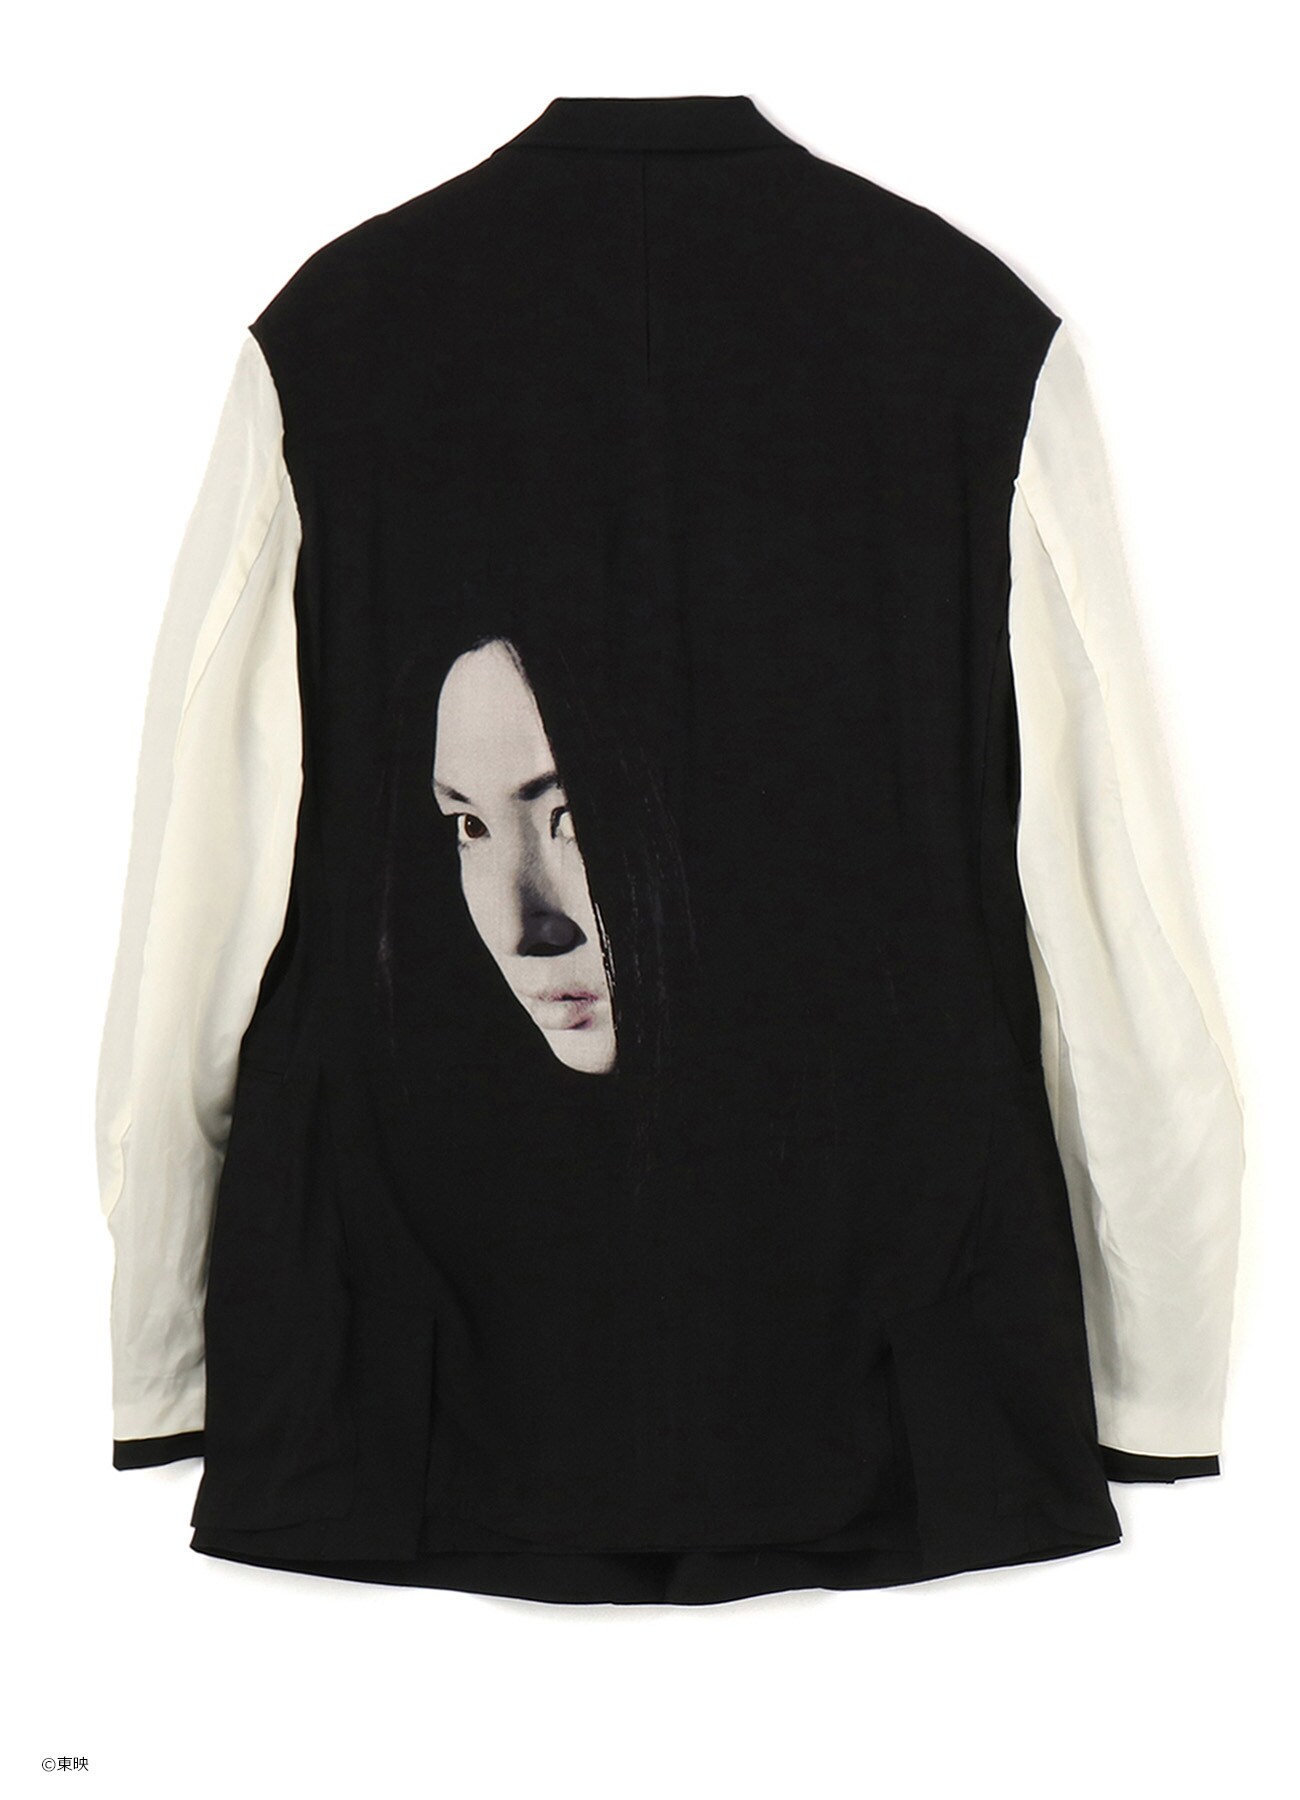 【5/24 10:00(JST) Release】FEMALE CONVICT: 701 SCORPION GRUDGE SONG REVERSIBLE JACKET